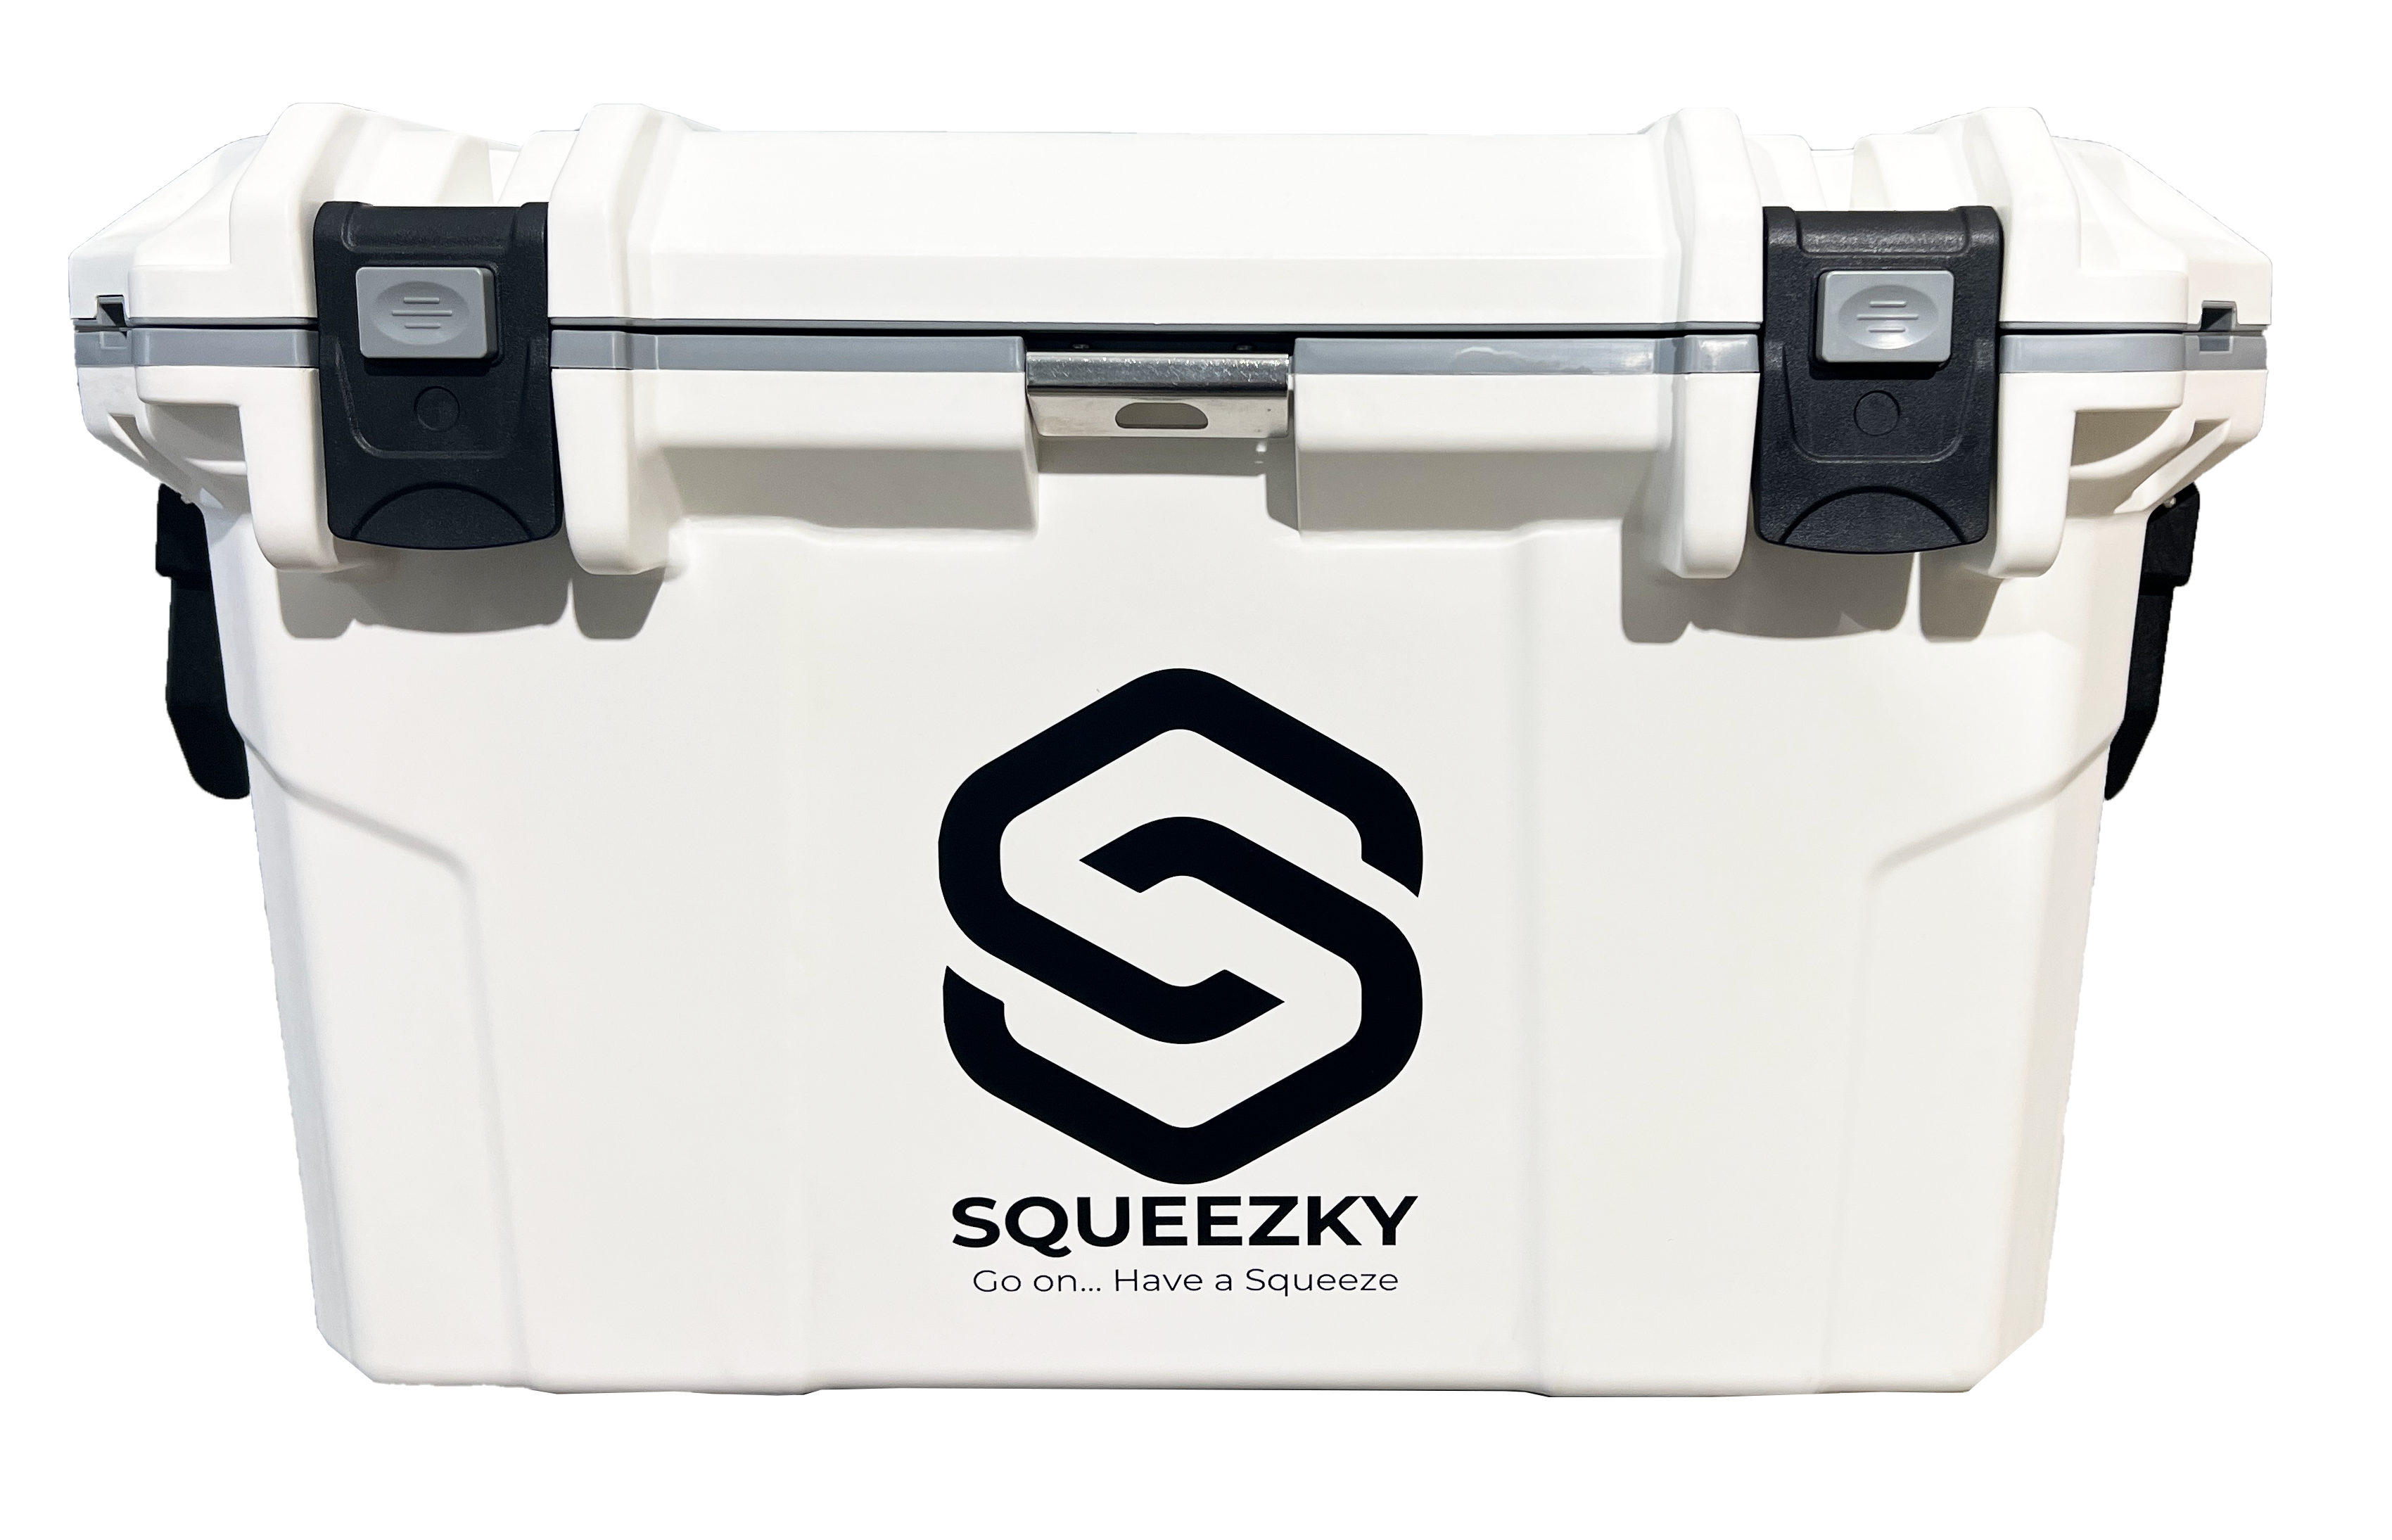 The Squeezky 70L